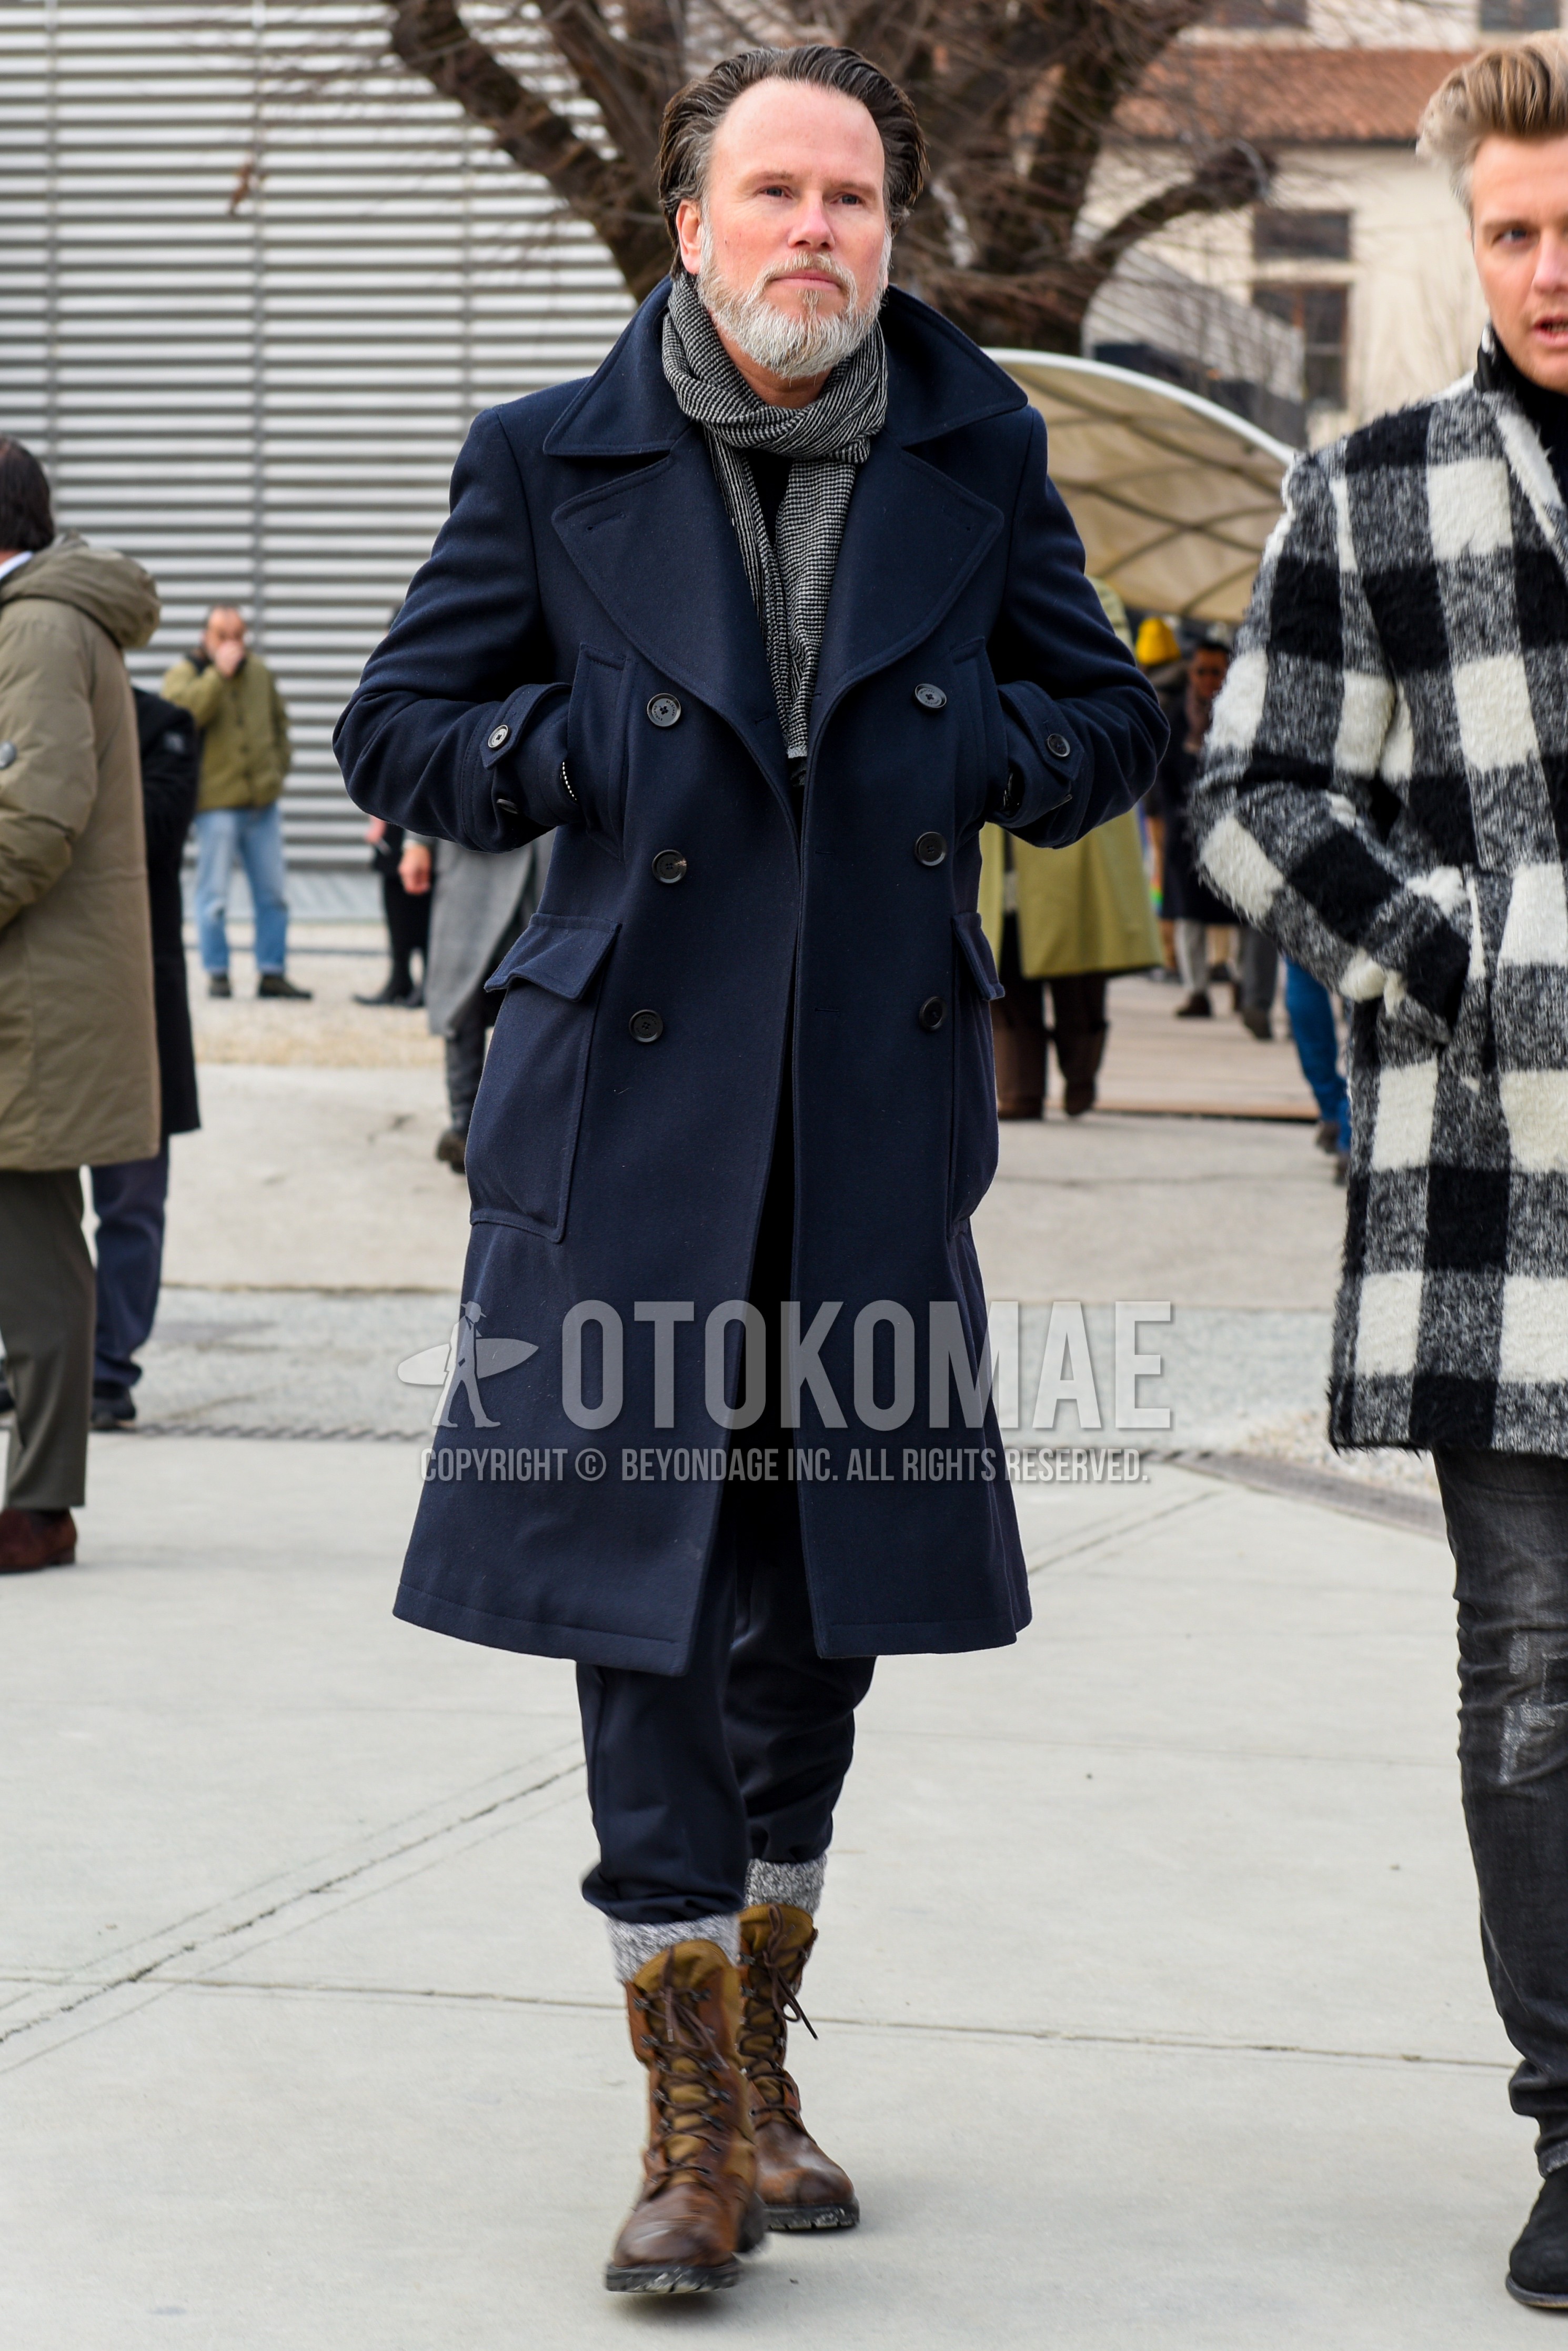 Men's autumn winter outfit with gray check scarf, navy plain ulster coat, black plain cotton pants, gray plain socks, brown  boots.